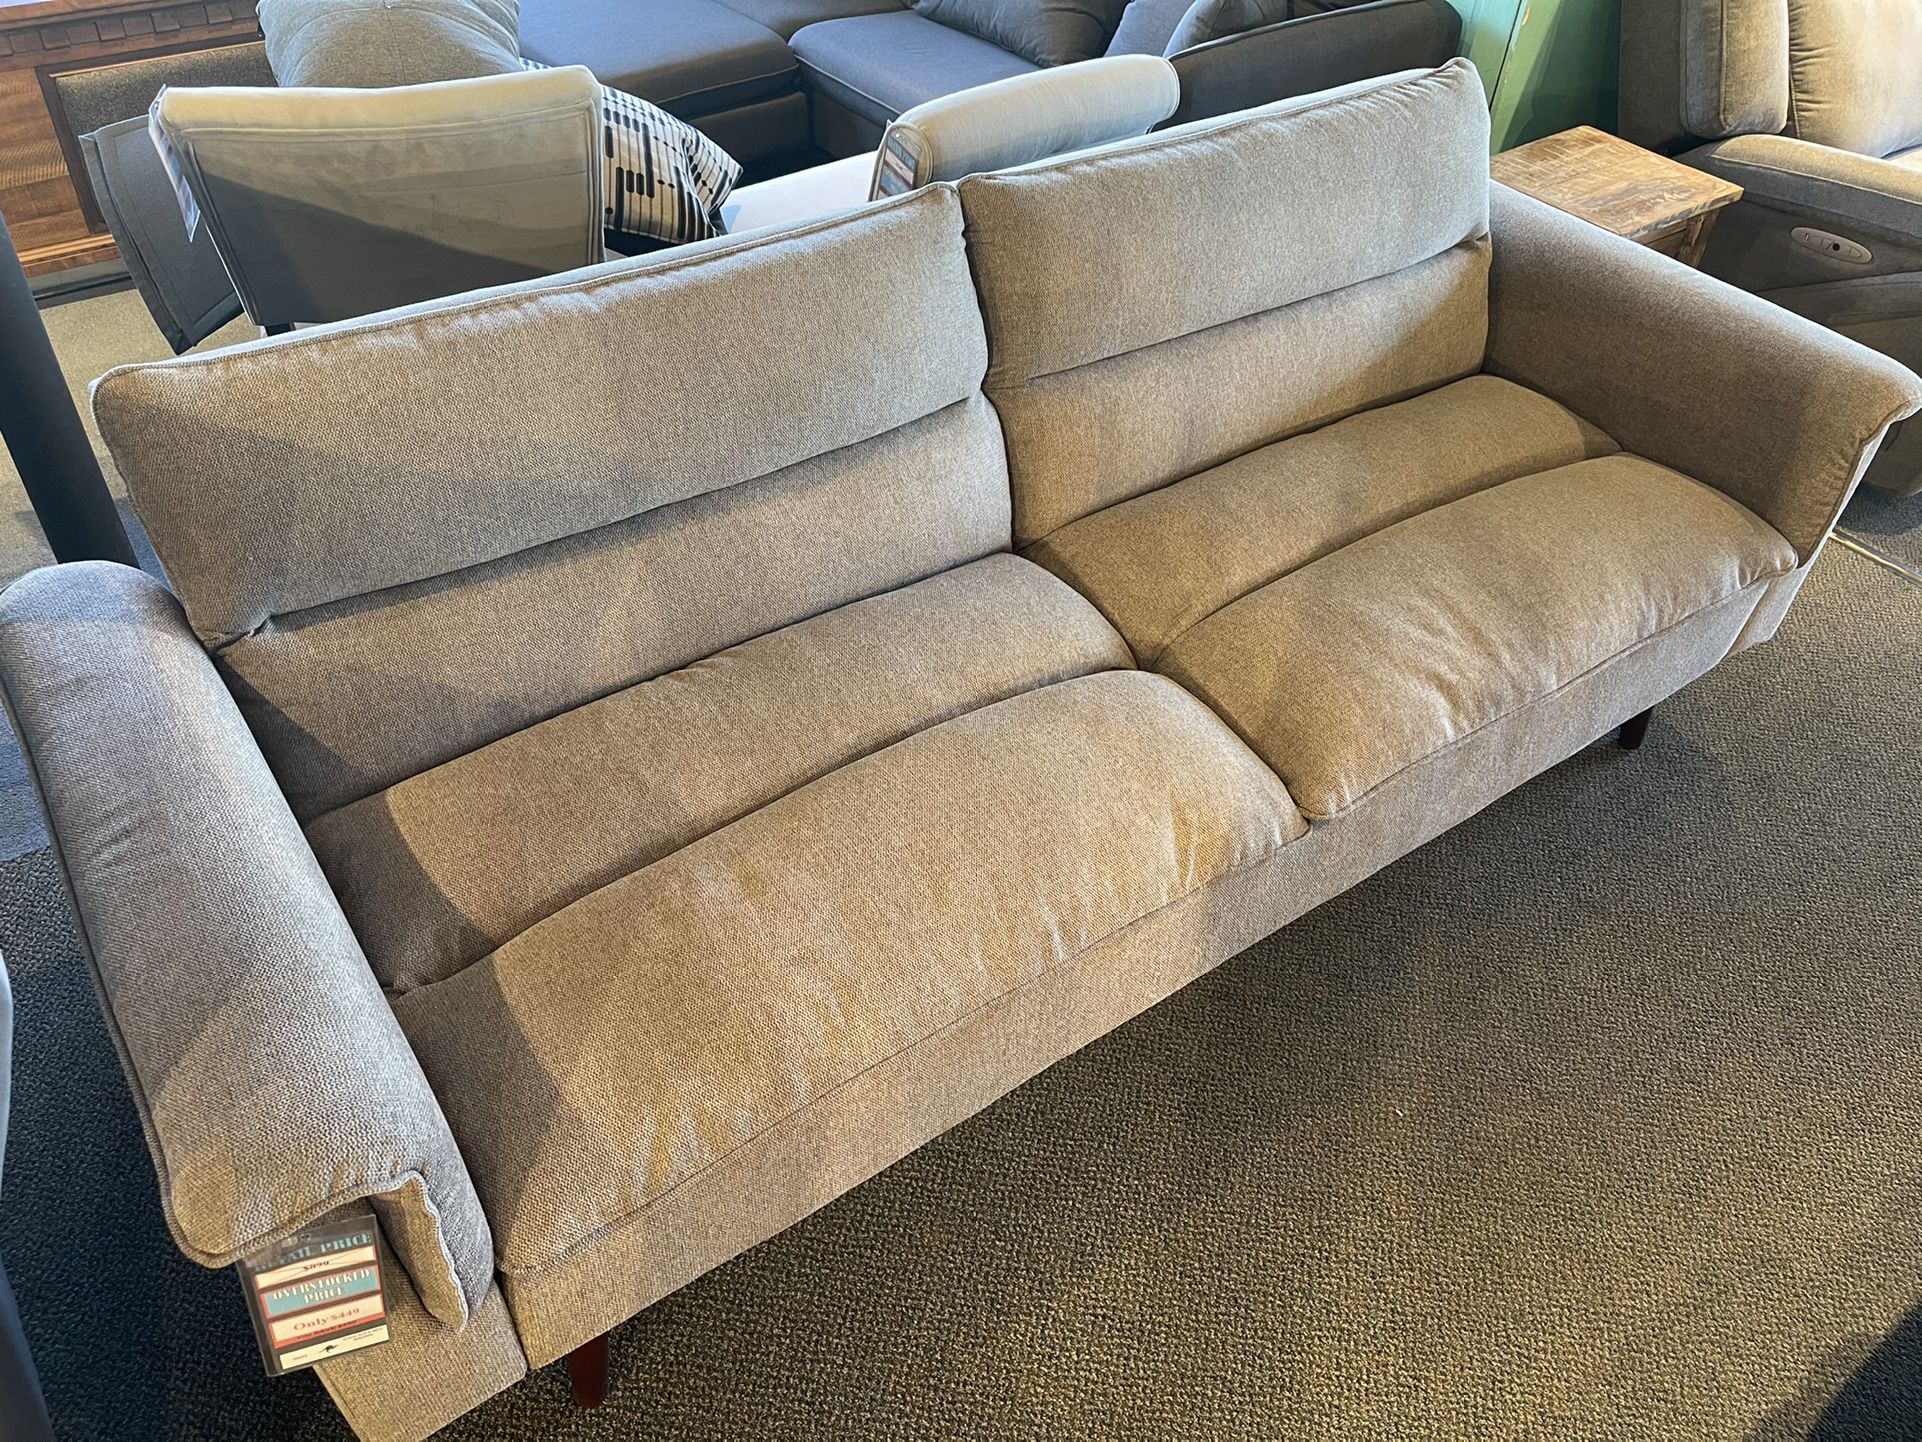 This sofa bed/futon is both comfortable and stylish